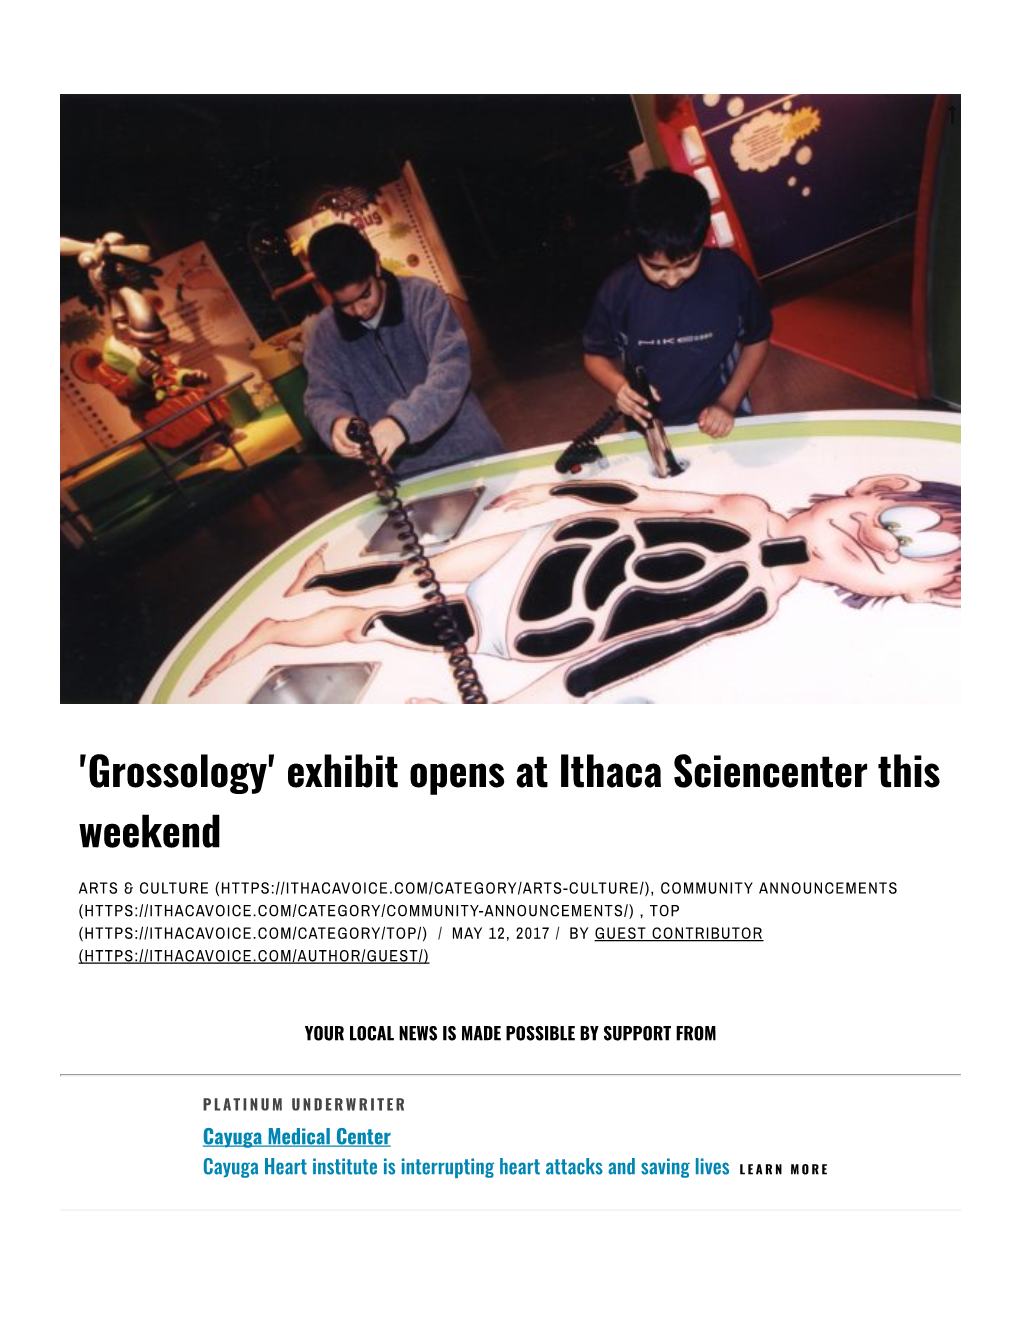 'Grossology' Exhibit Opens at Ithaca Sciencenter This Weekend